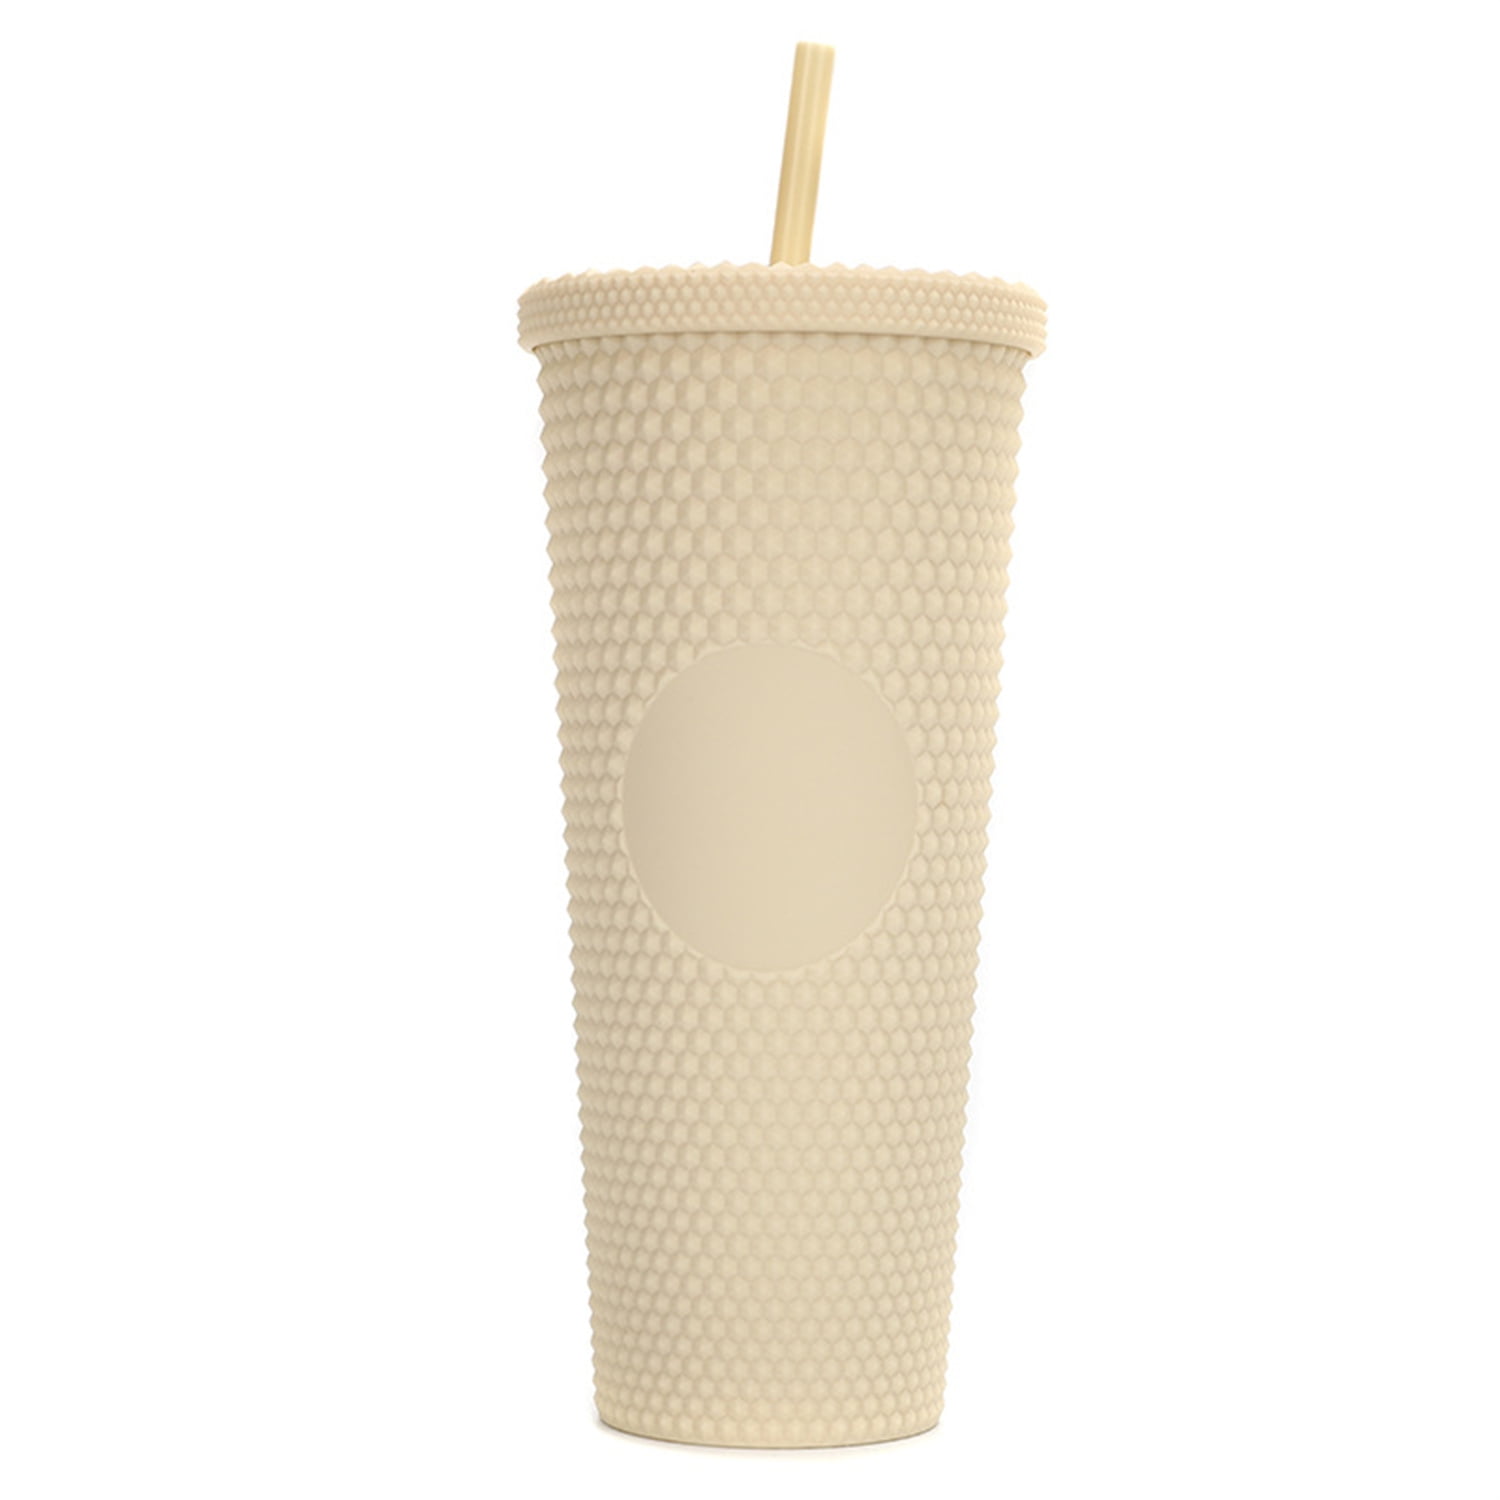 Two Starbucks Reusable Plastic 24oz Cold Cups Venti Size with 2 Lids and  Straws